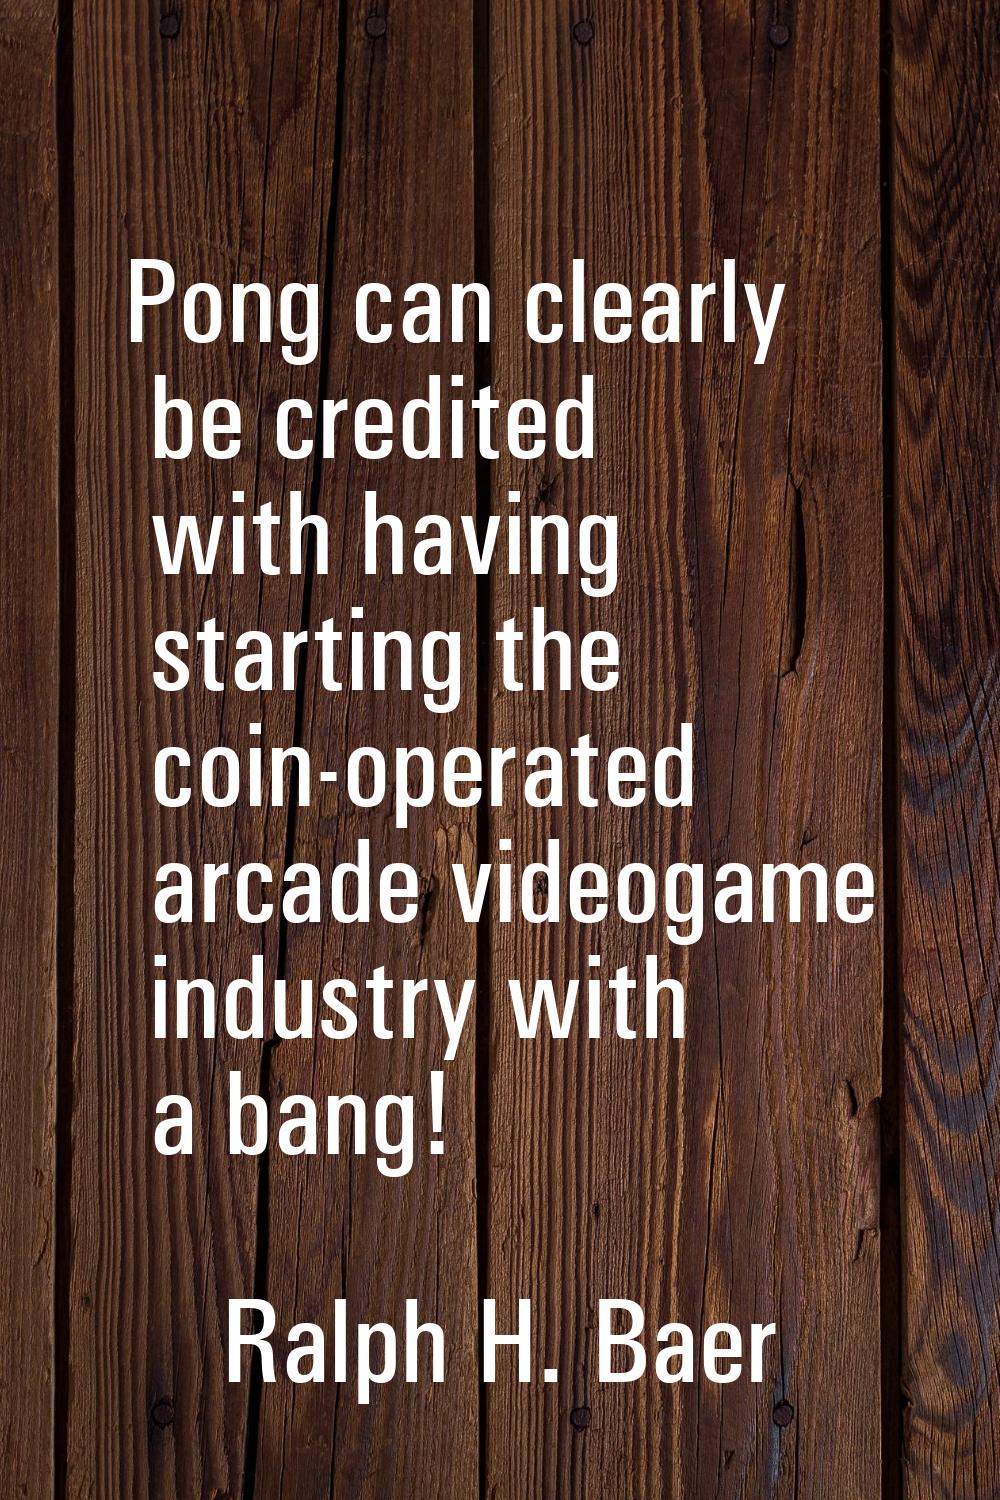 Pong can clearly be credited with having starting the coin-operated arcade videogame industry with 